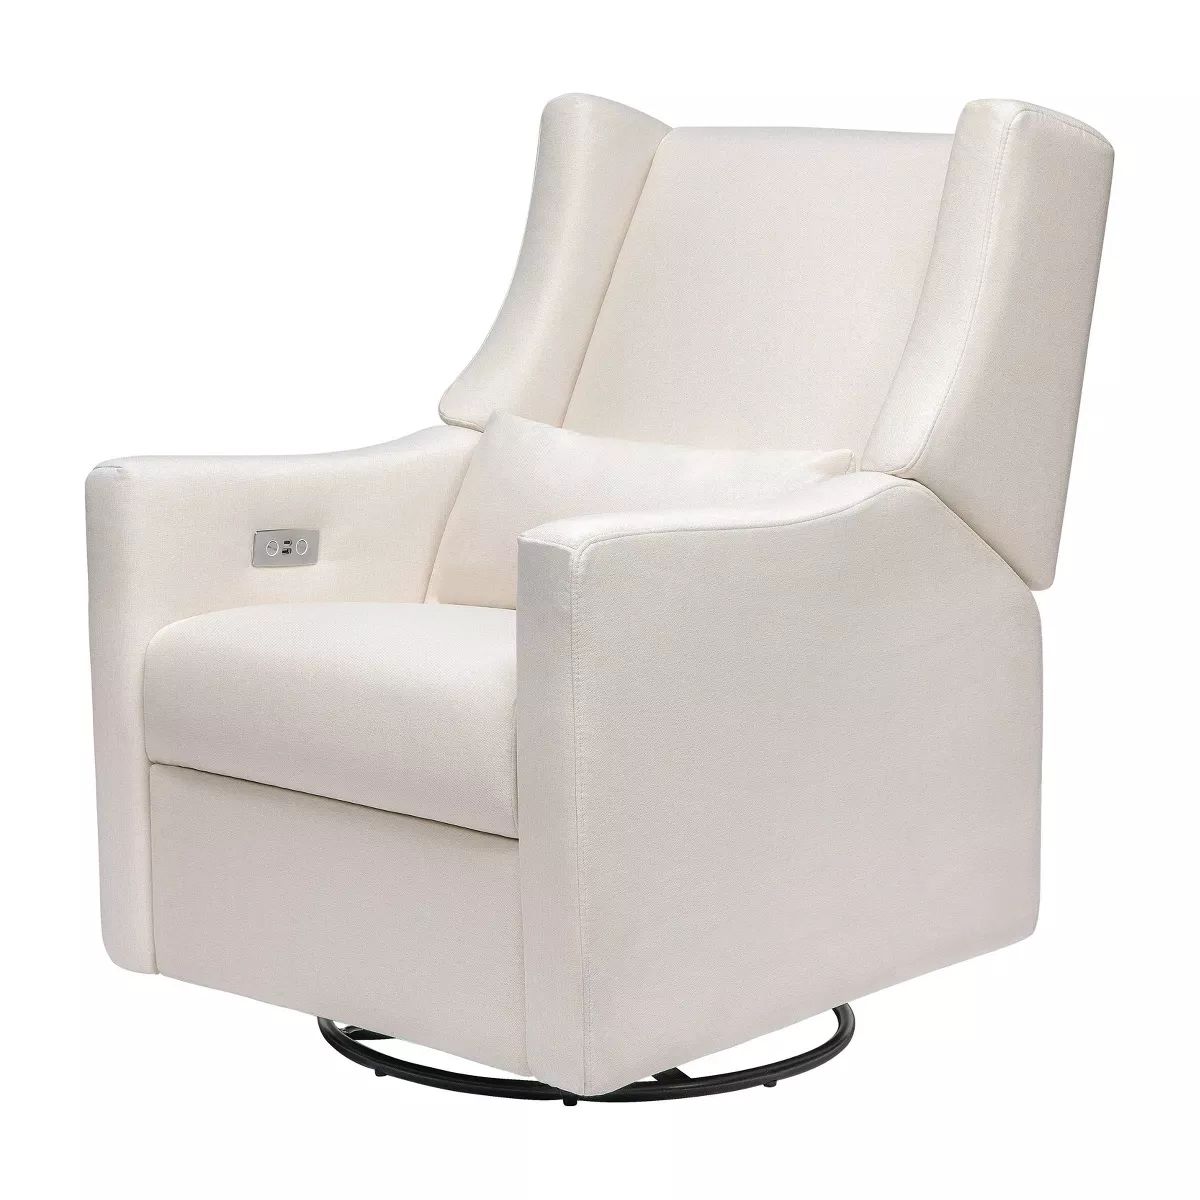 Babyletto Kiwi Glider Power Recliner with Electronic Control and USB - Performance Beach | Target